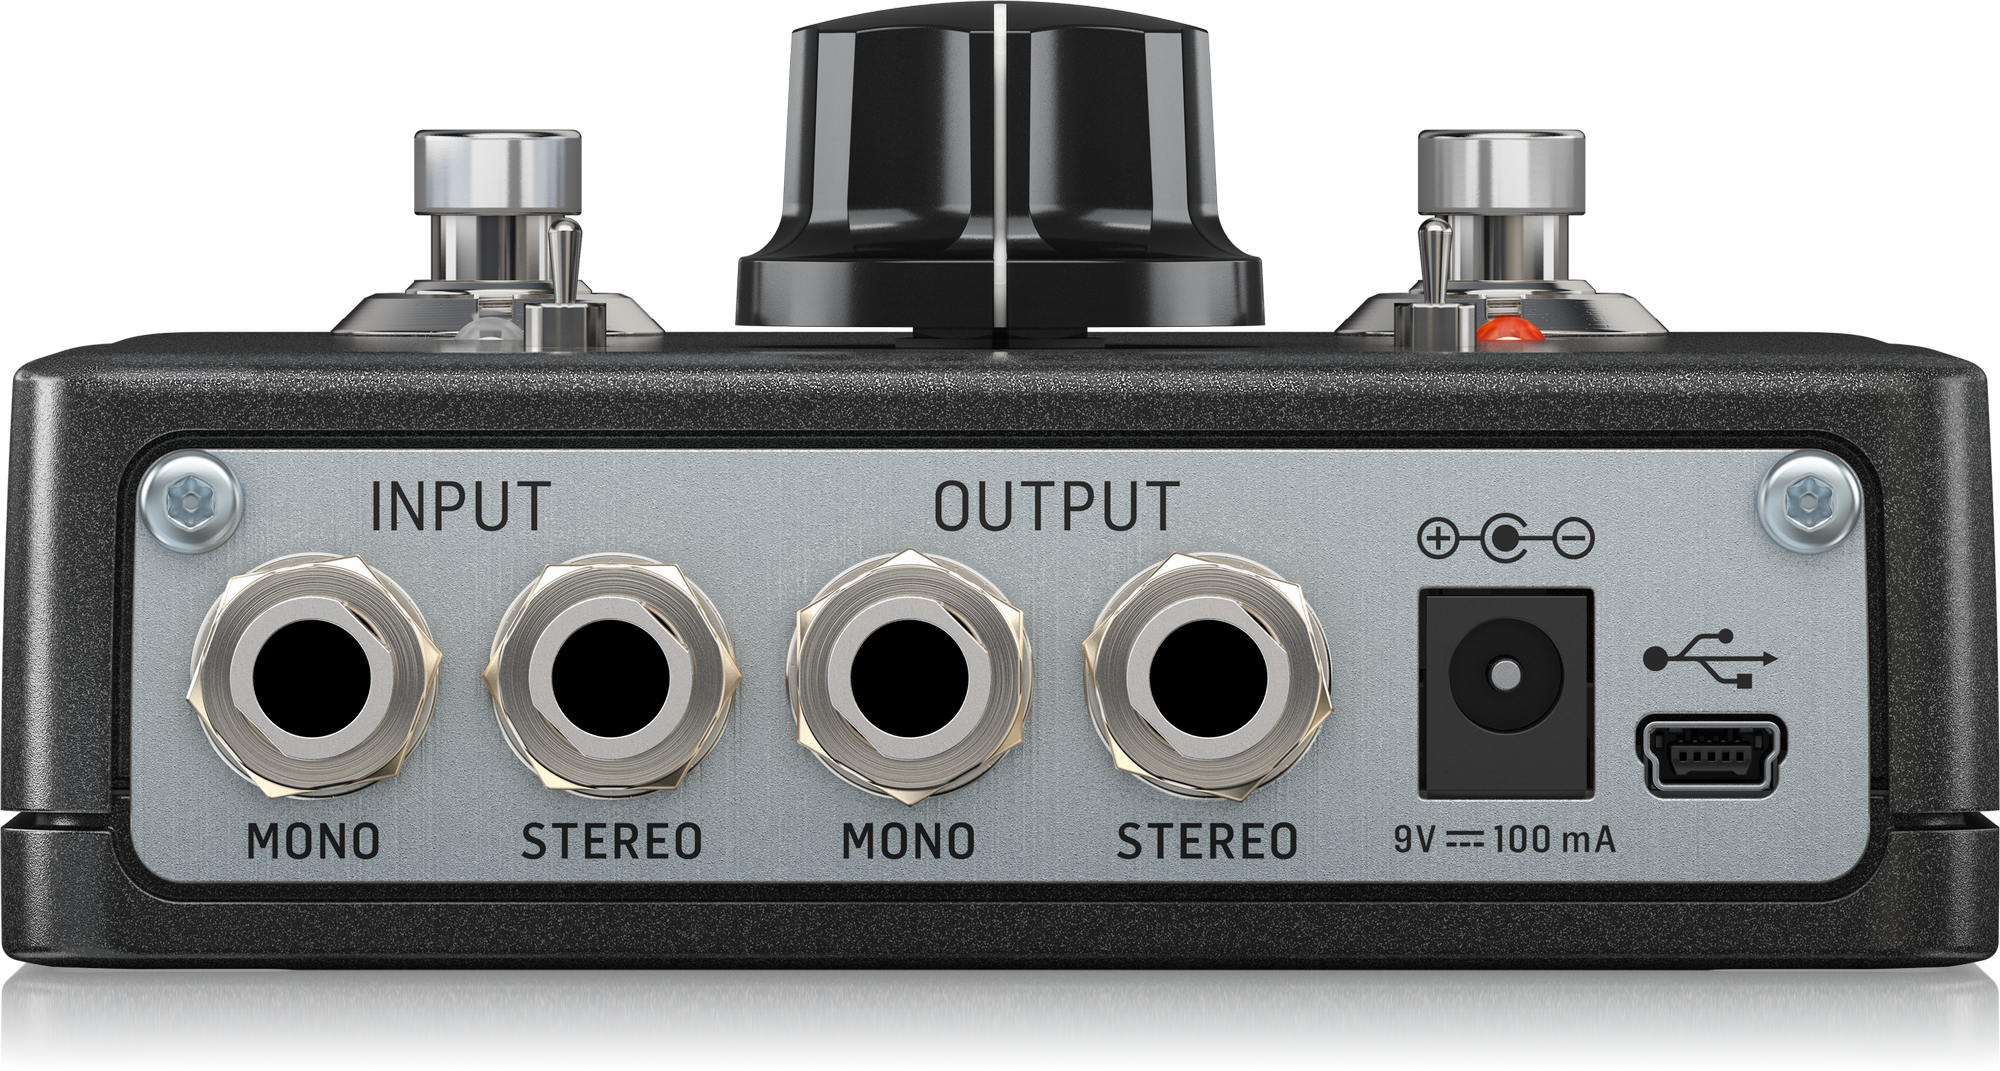 TC Electronic | Product | DITTO X2 LOOPER